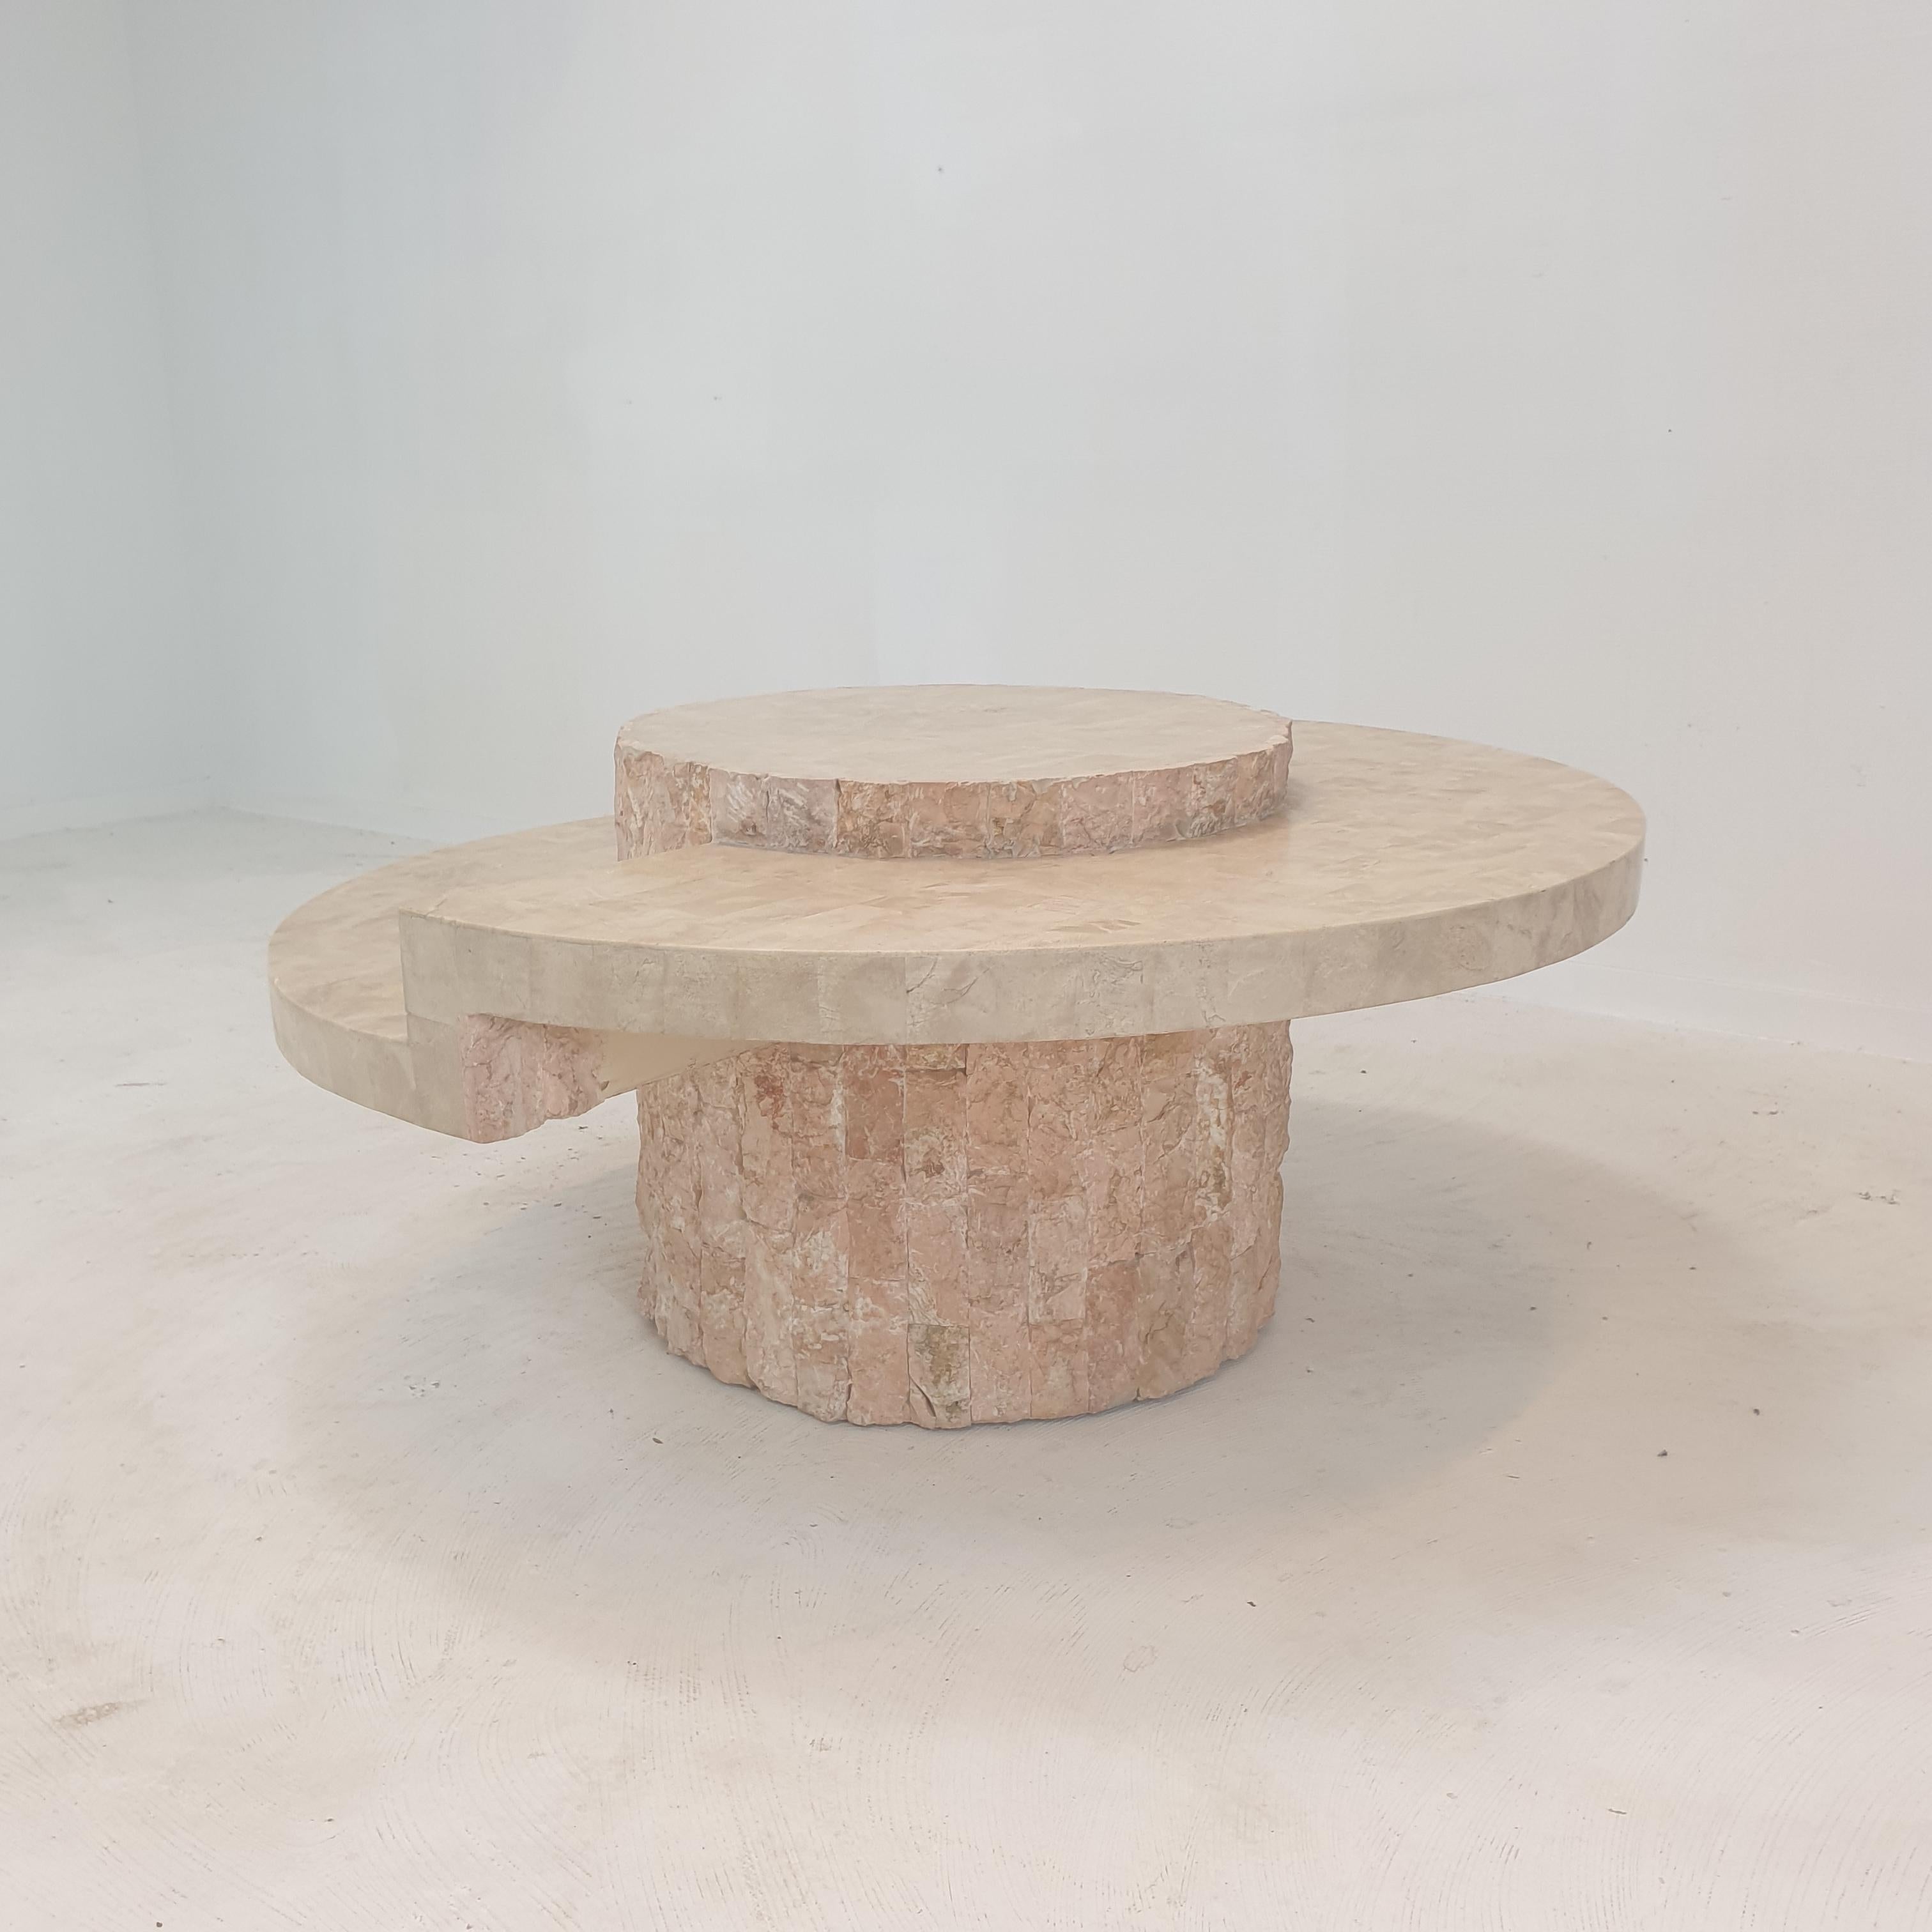 Magnussen Ponte Mactan Stone or Fossil Stone Coffee Table, 1980s For Sale 3